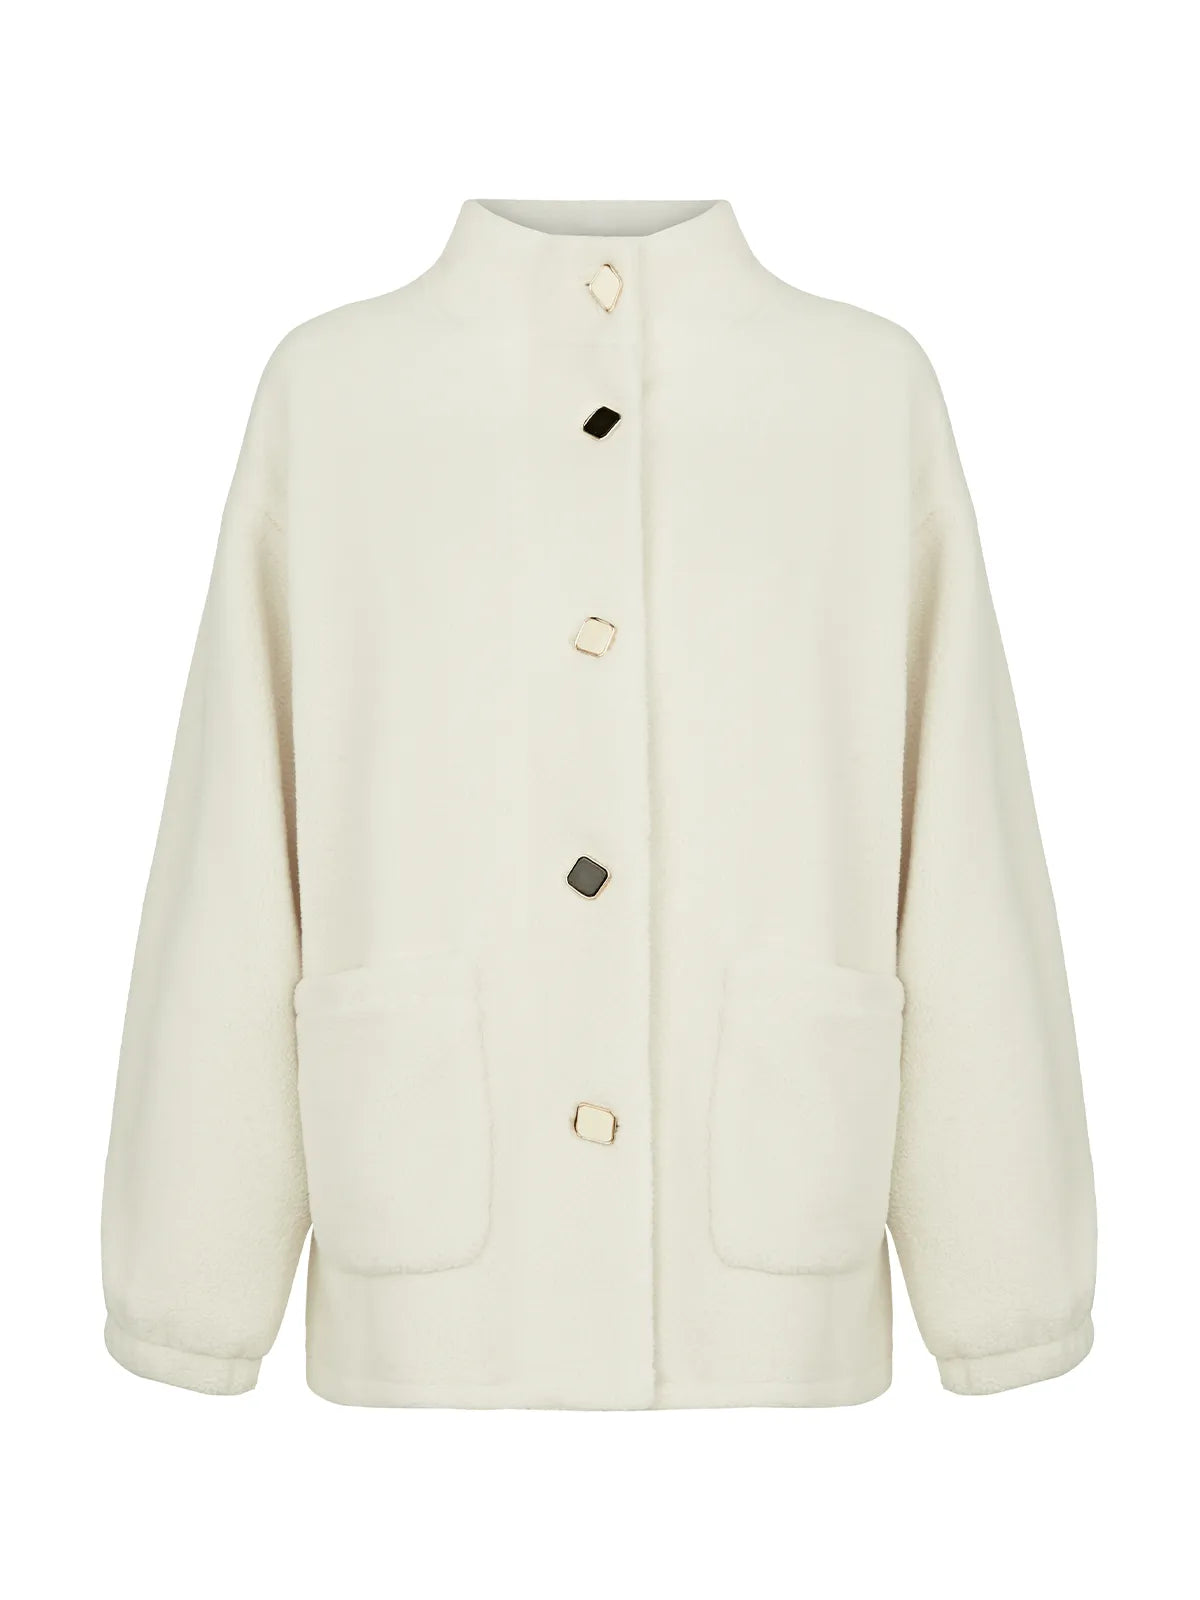 Achieve contemporary elegance with this beige fleece jacket, adorned with button detailing, offering a stylish and modern outerwear option.